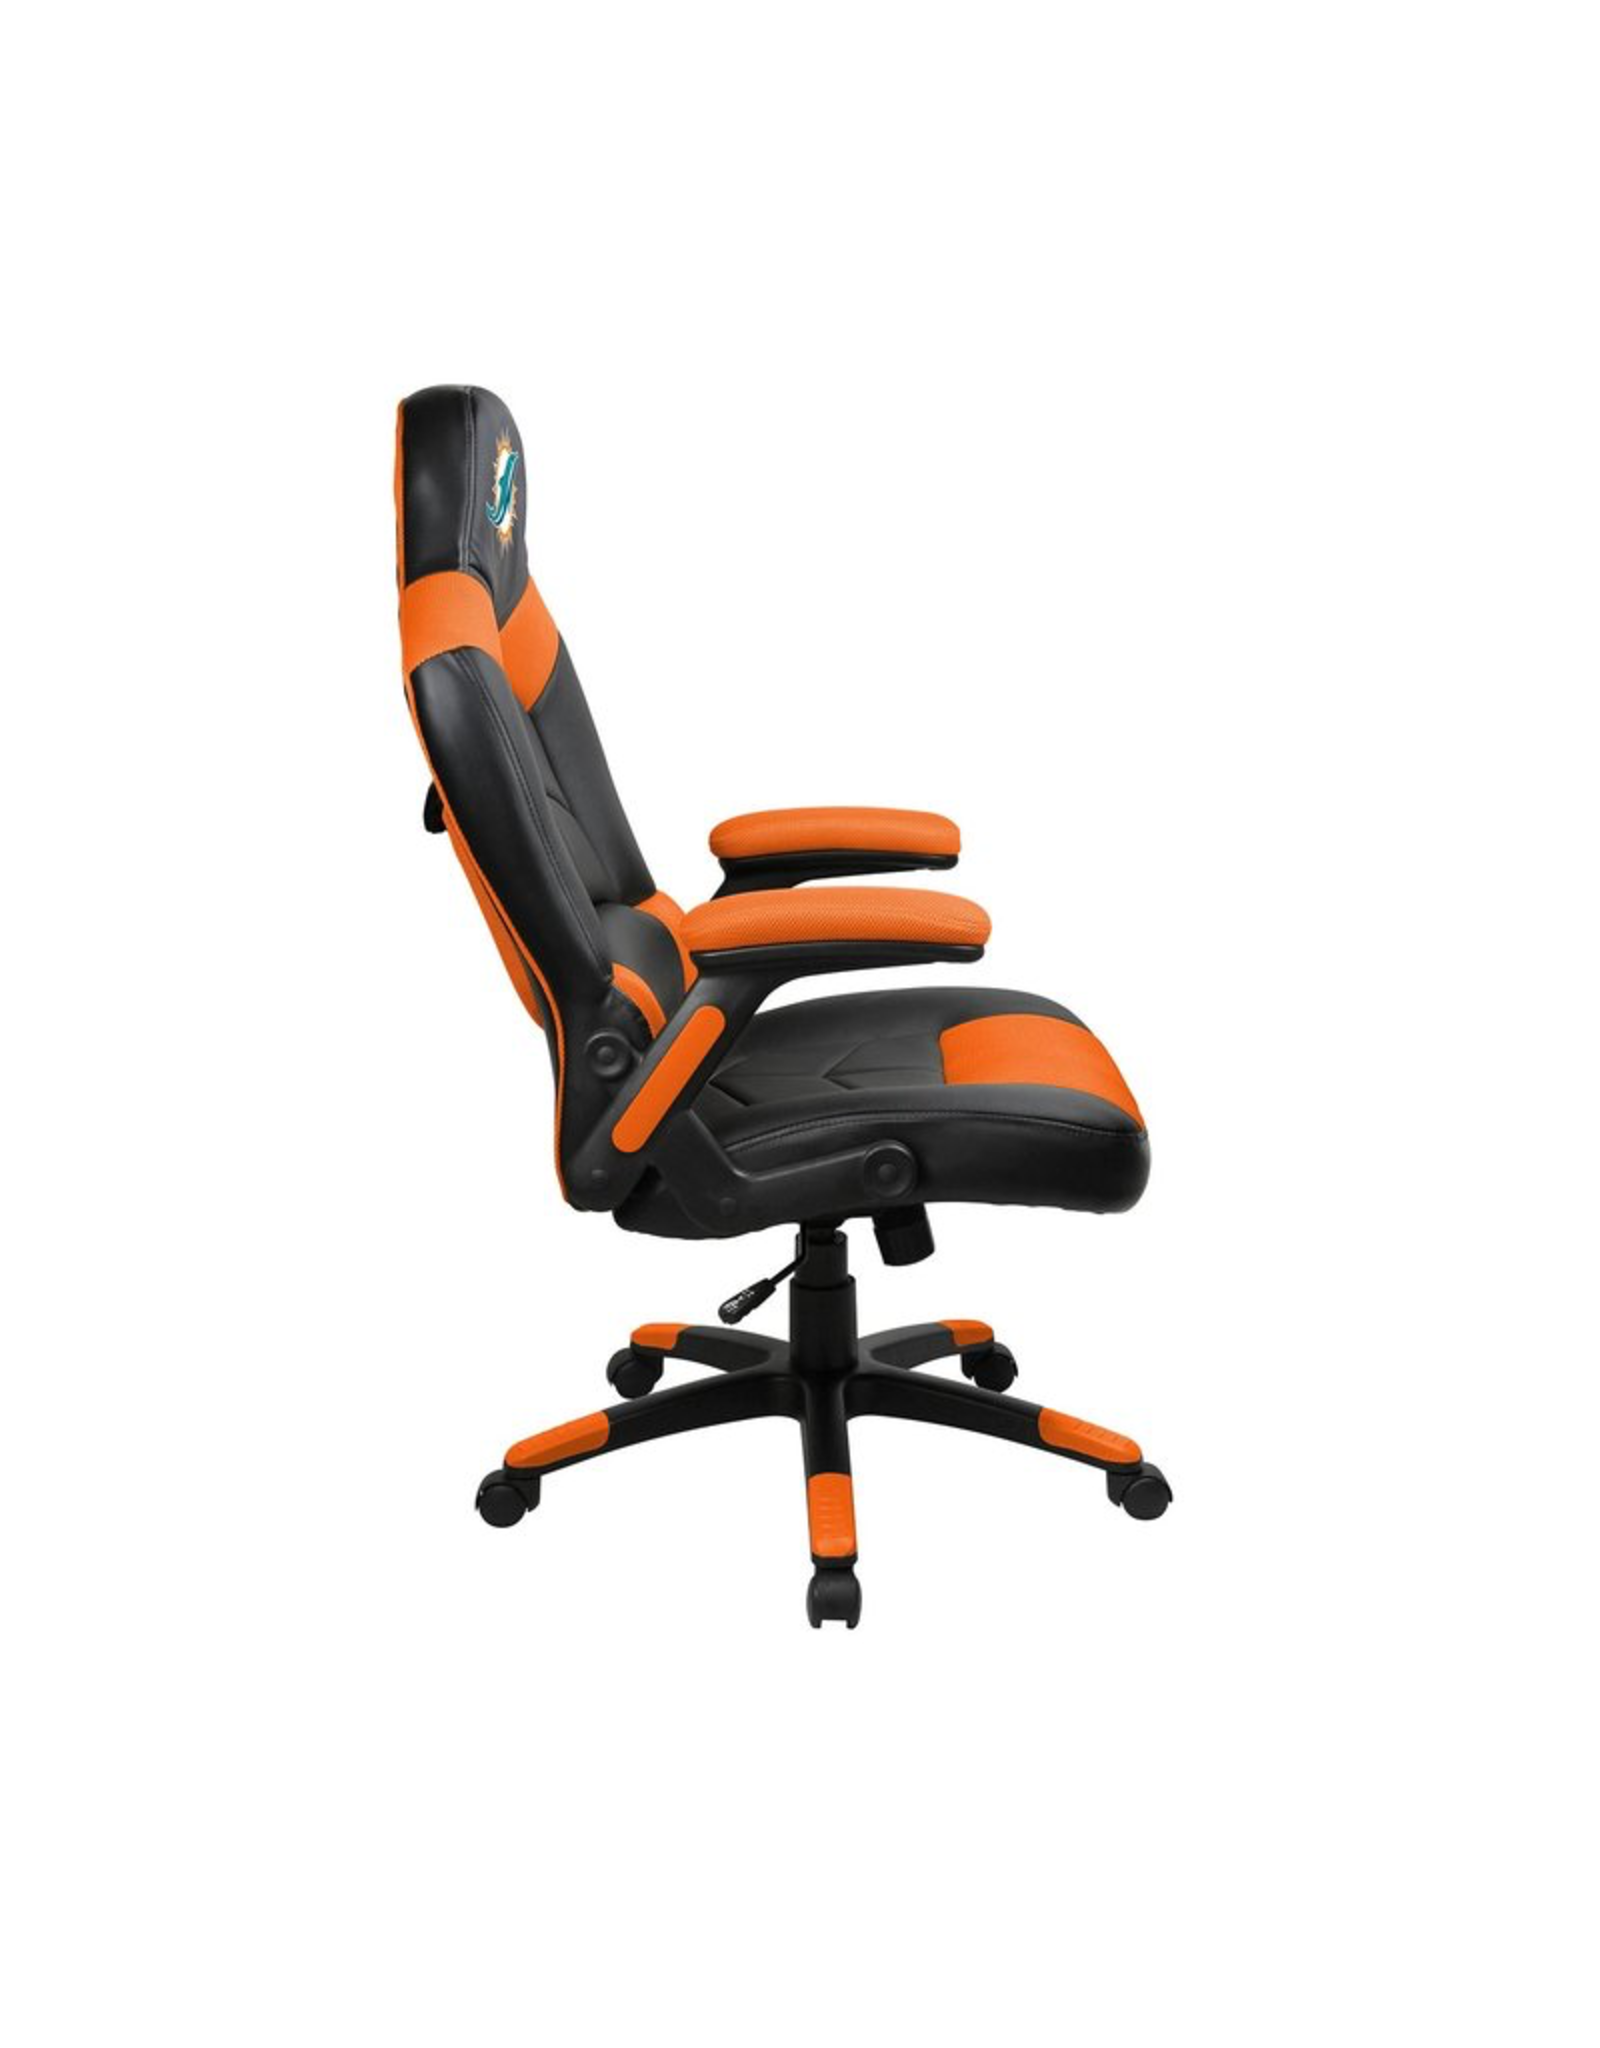 Imperial Miami Dolphins Gaming / Office Chair